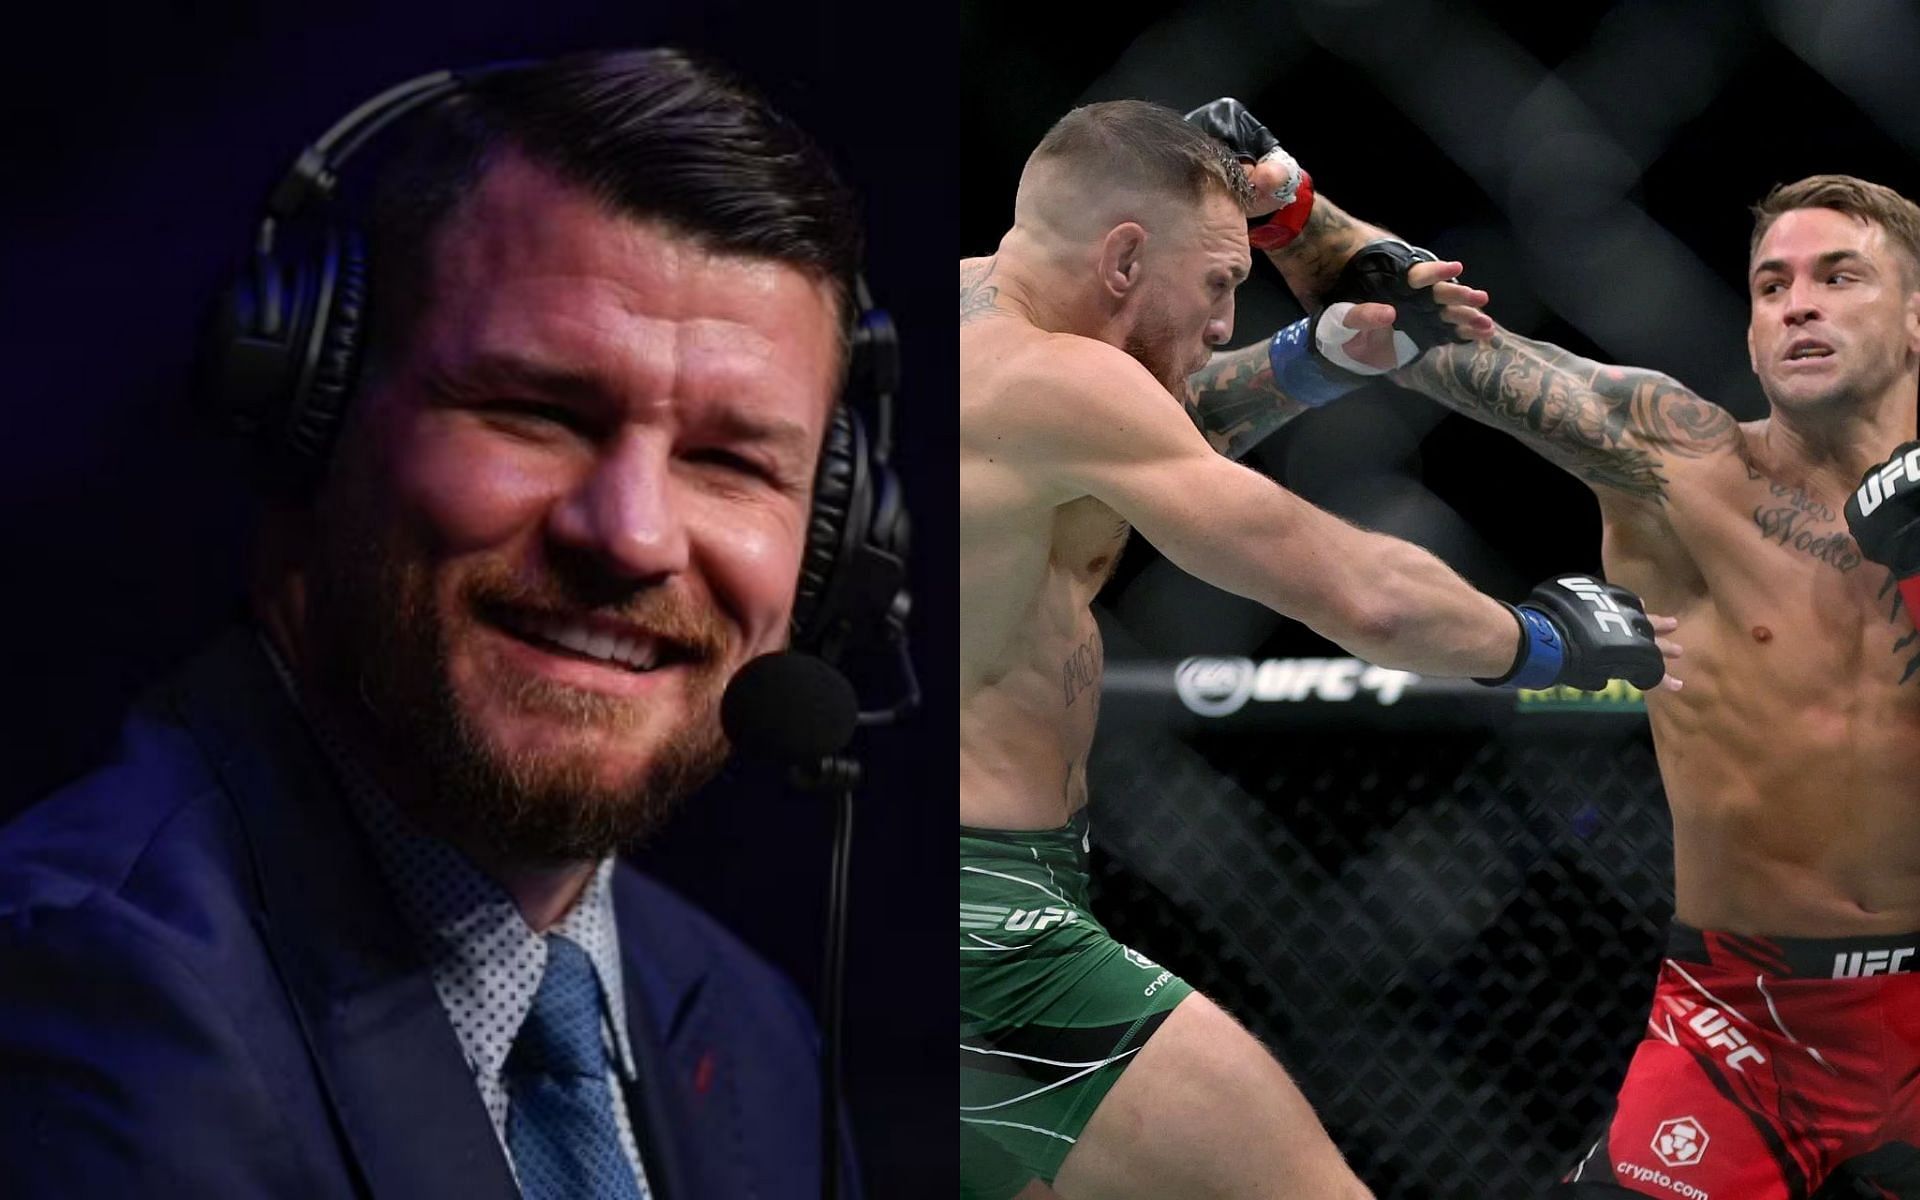 Conor McGregor suffered back-to-back losses against Dustin Poirier in 2021